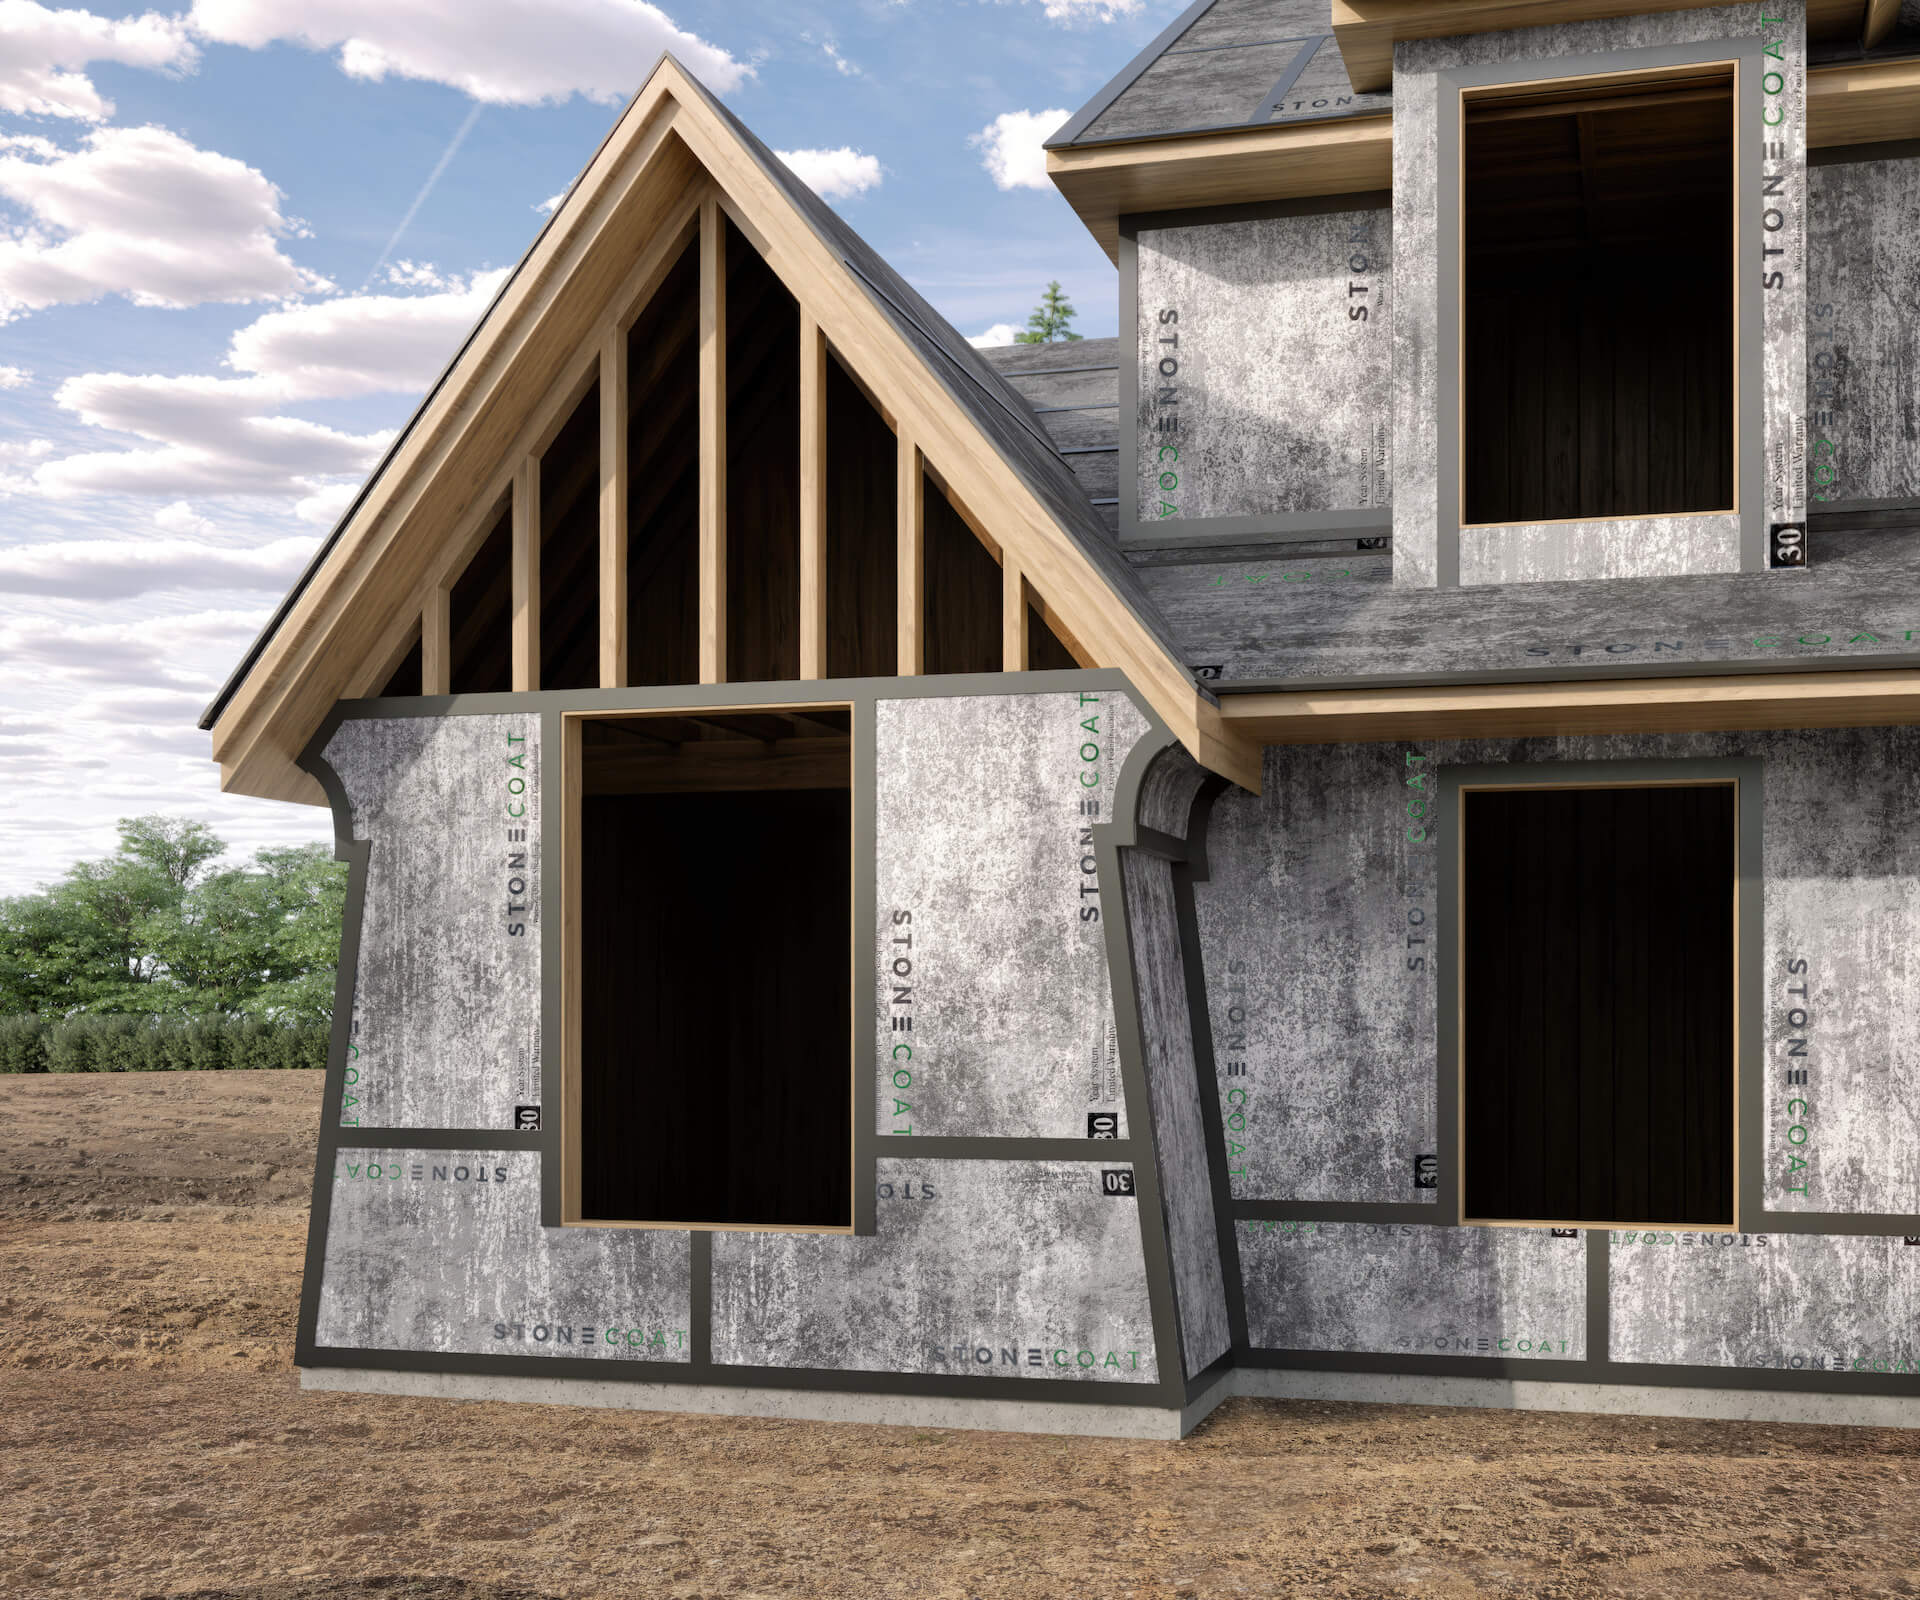 A rendering of the exterior of a house covered in StoneCoat FUSION showing a cutaway of a portion of the roof